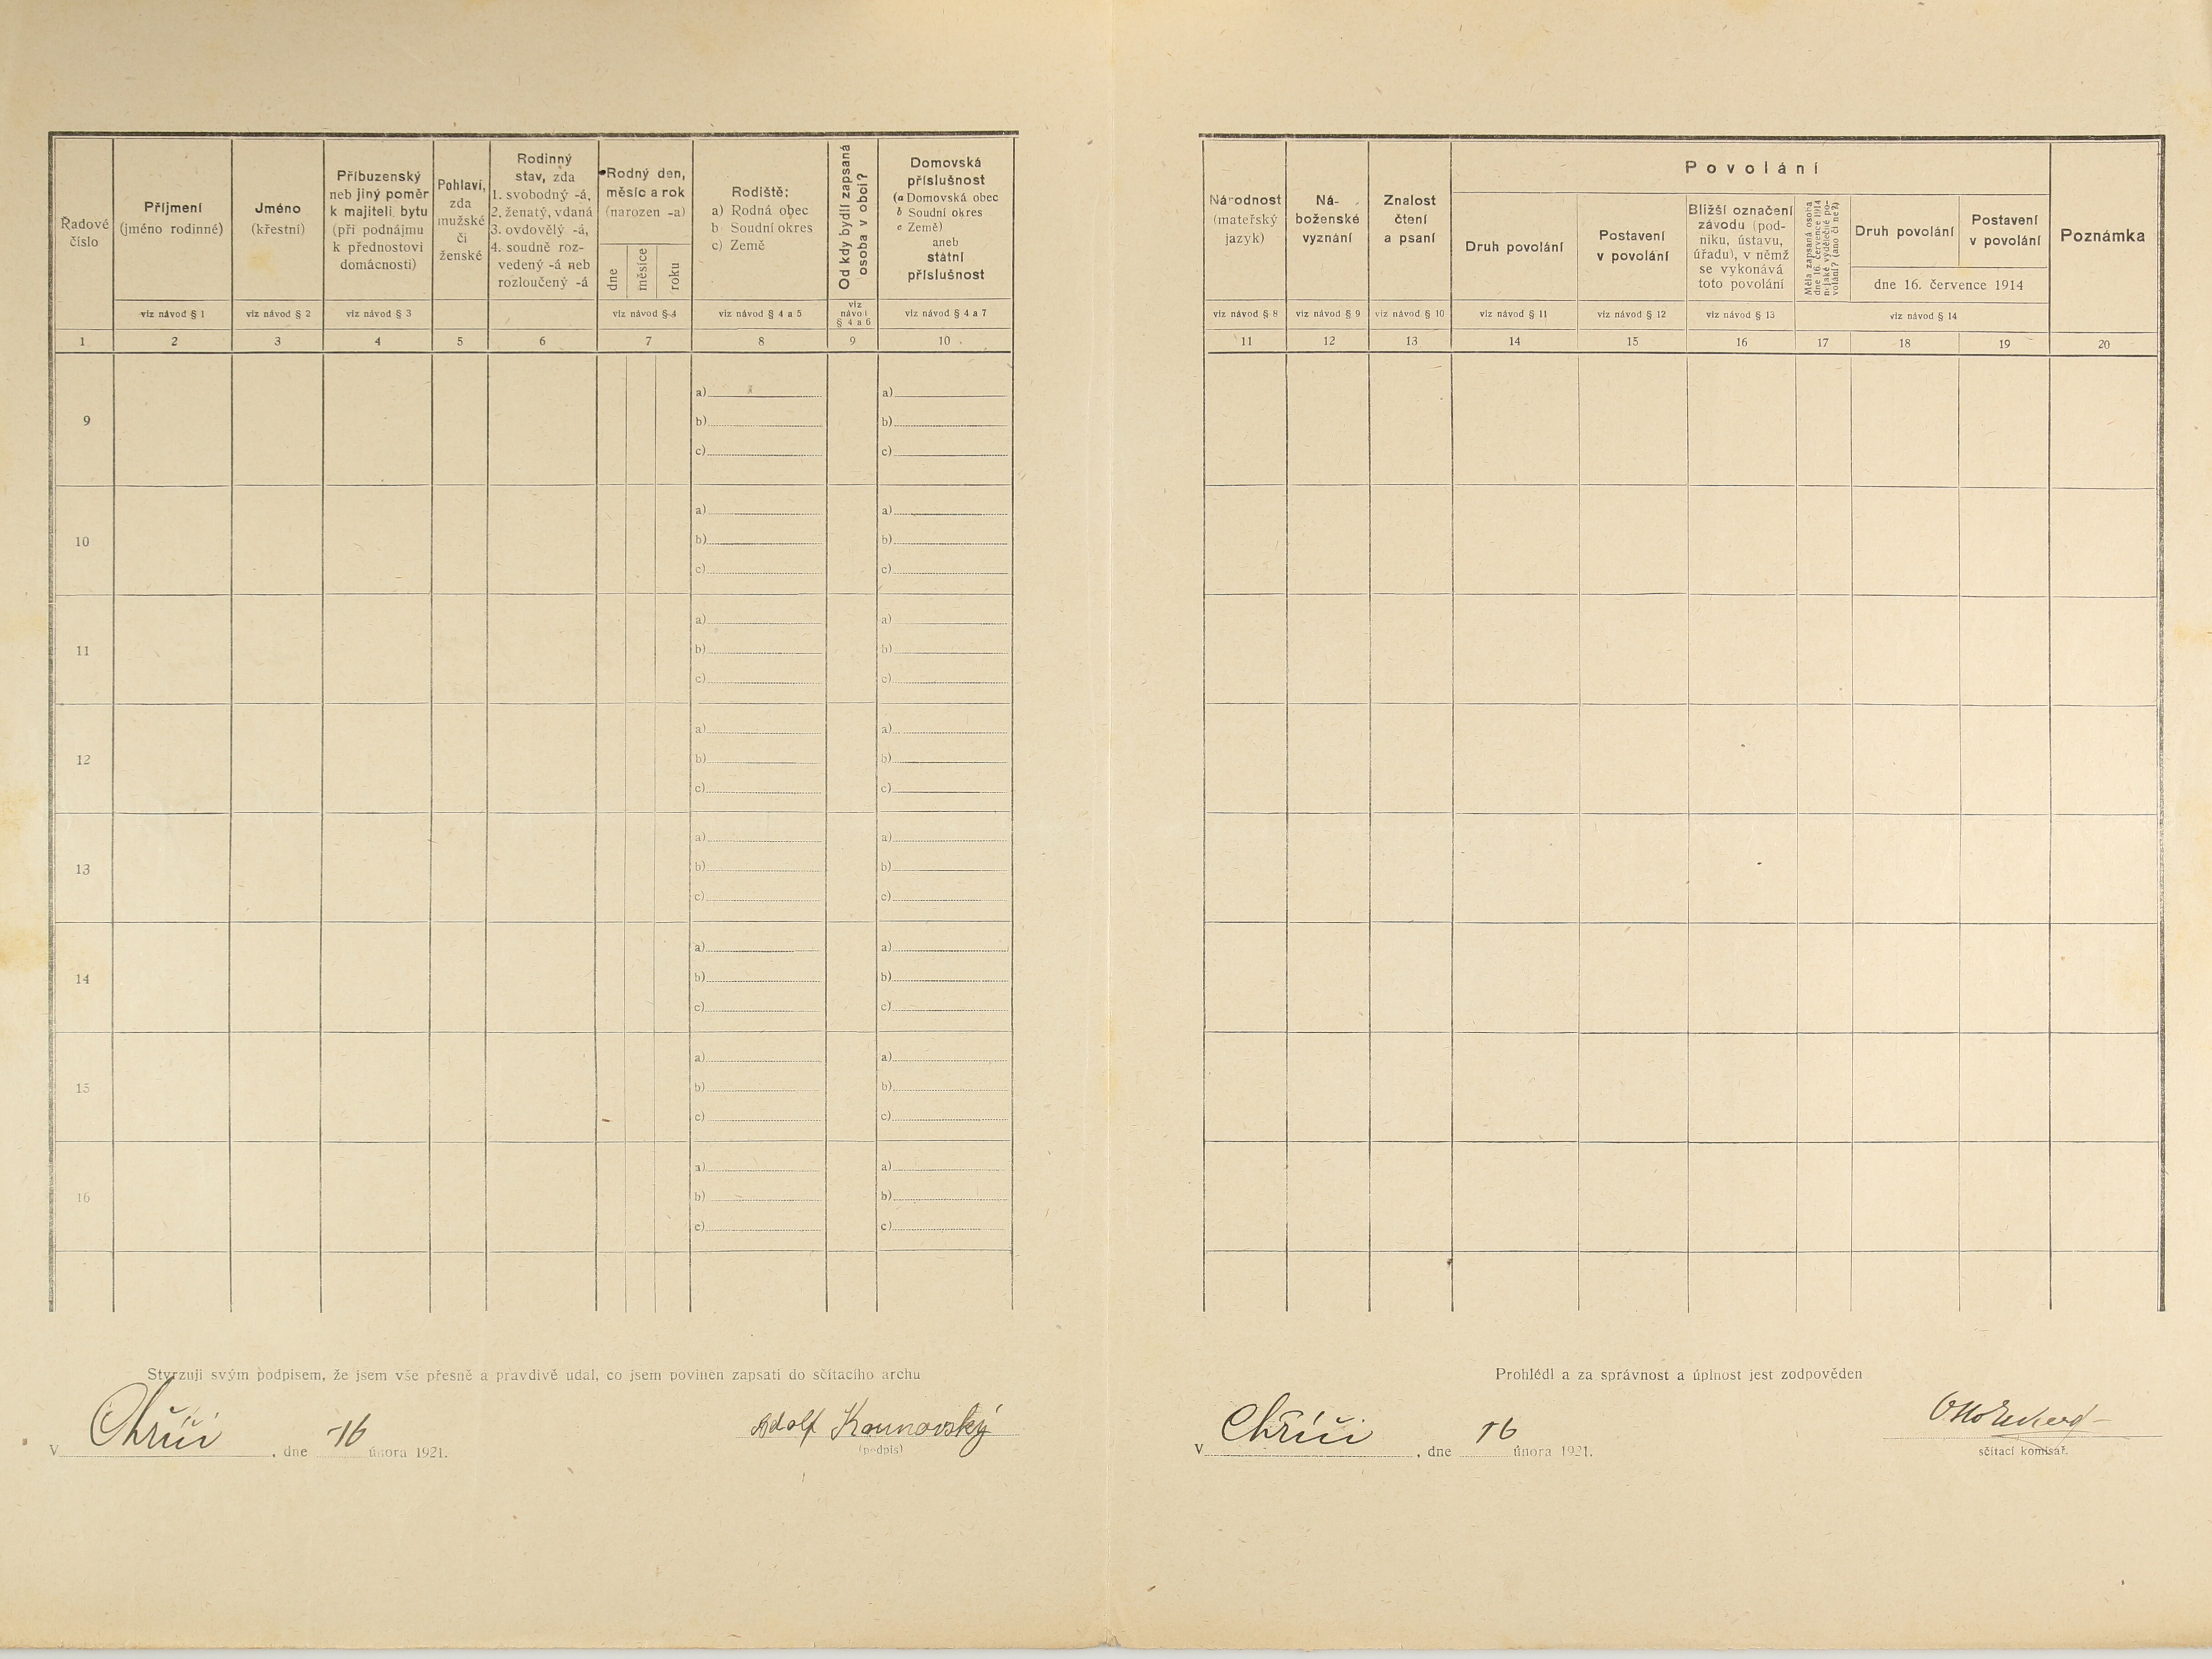 5. soap-ps_00423_census-1921-chric-cp002_0050